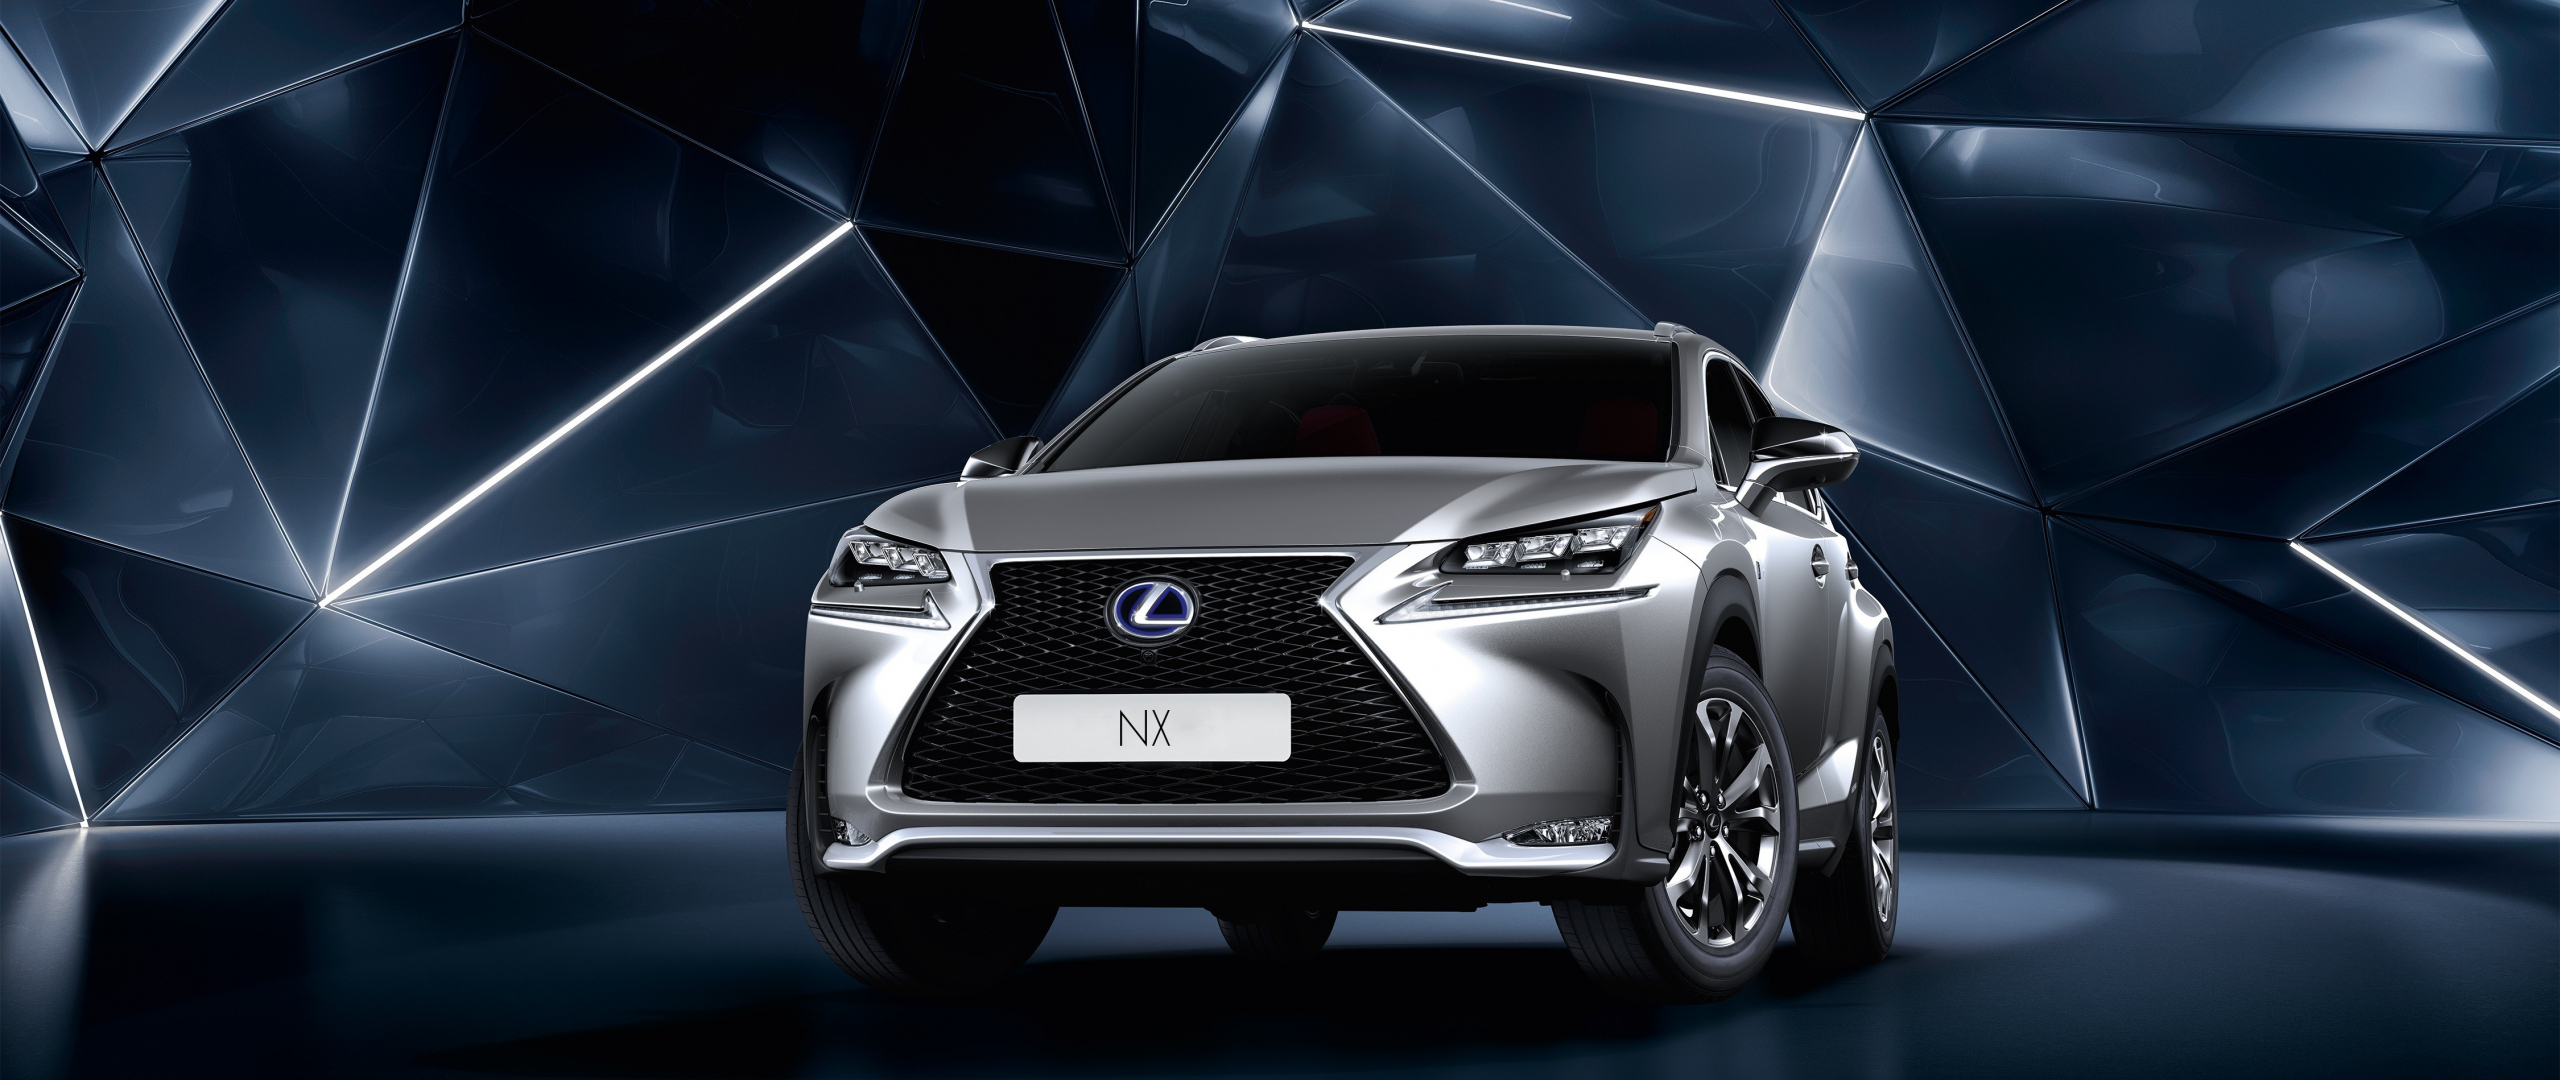 Download 2560x1080 Wallpaper 17 Lexus Nx Luxury Crossover Hybrid Silver Car Dual Wide Widescreen 2560x1080 Hd Image Background 7795